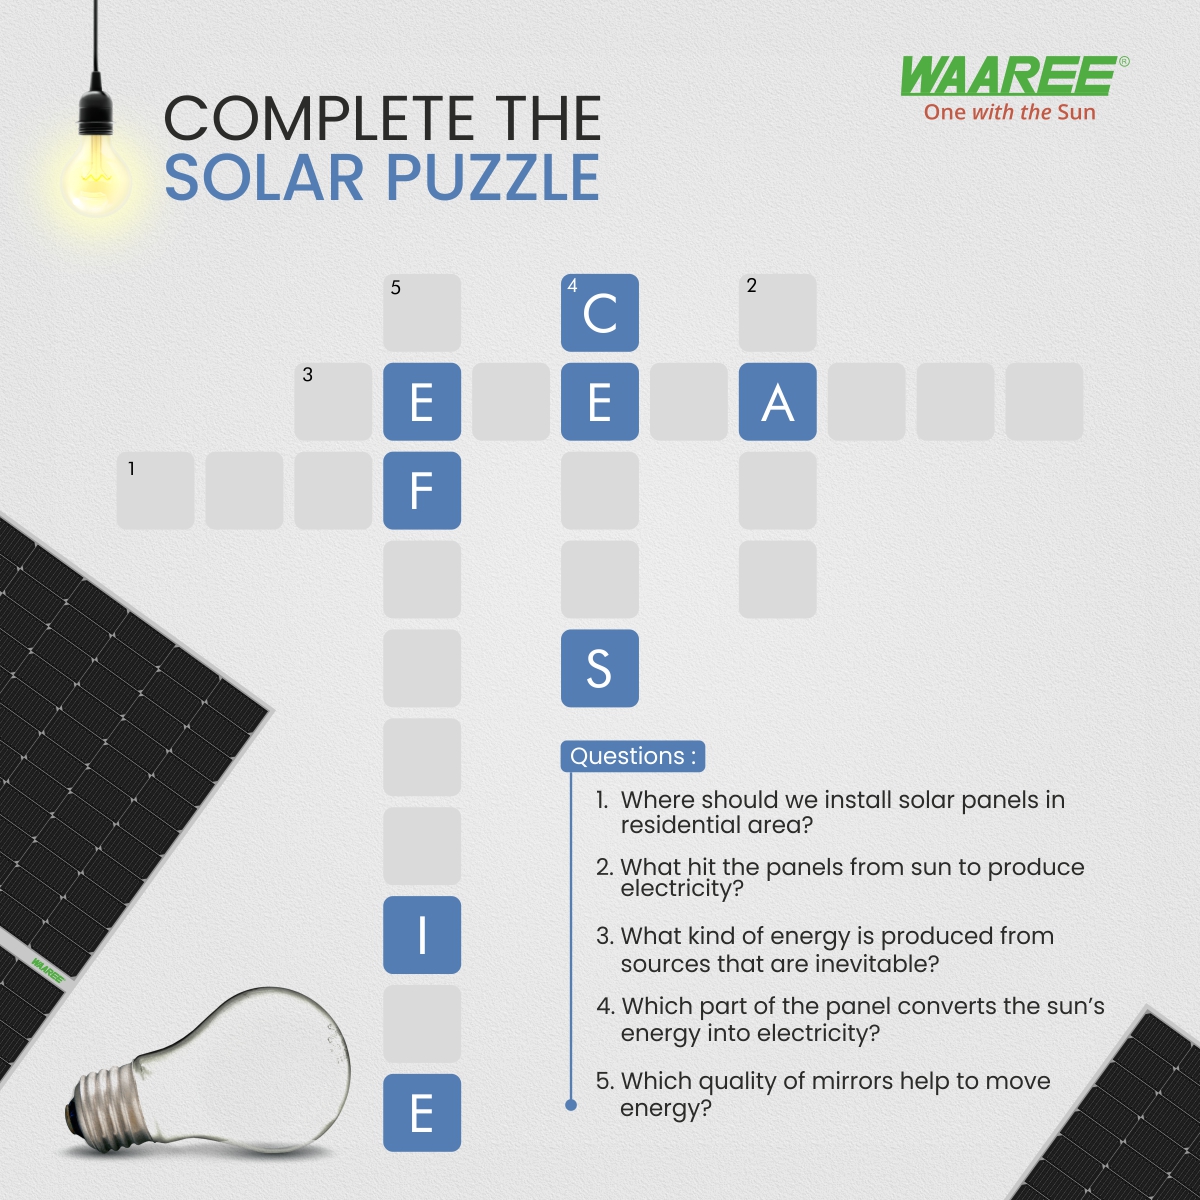 And here we go! Solar Knowledge Challenge, come and crack this puzzle & let us know the answers in the comments.
#puzzle #solarindustry #renewableenergy #bestsolarcompany